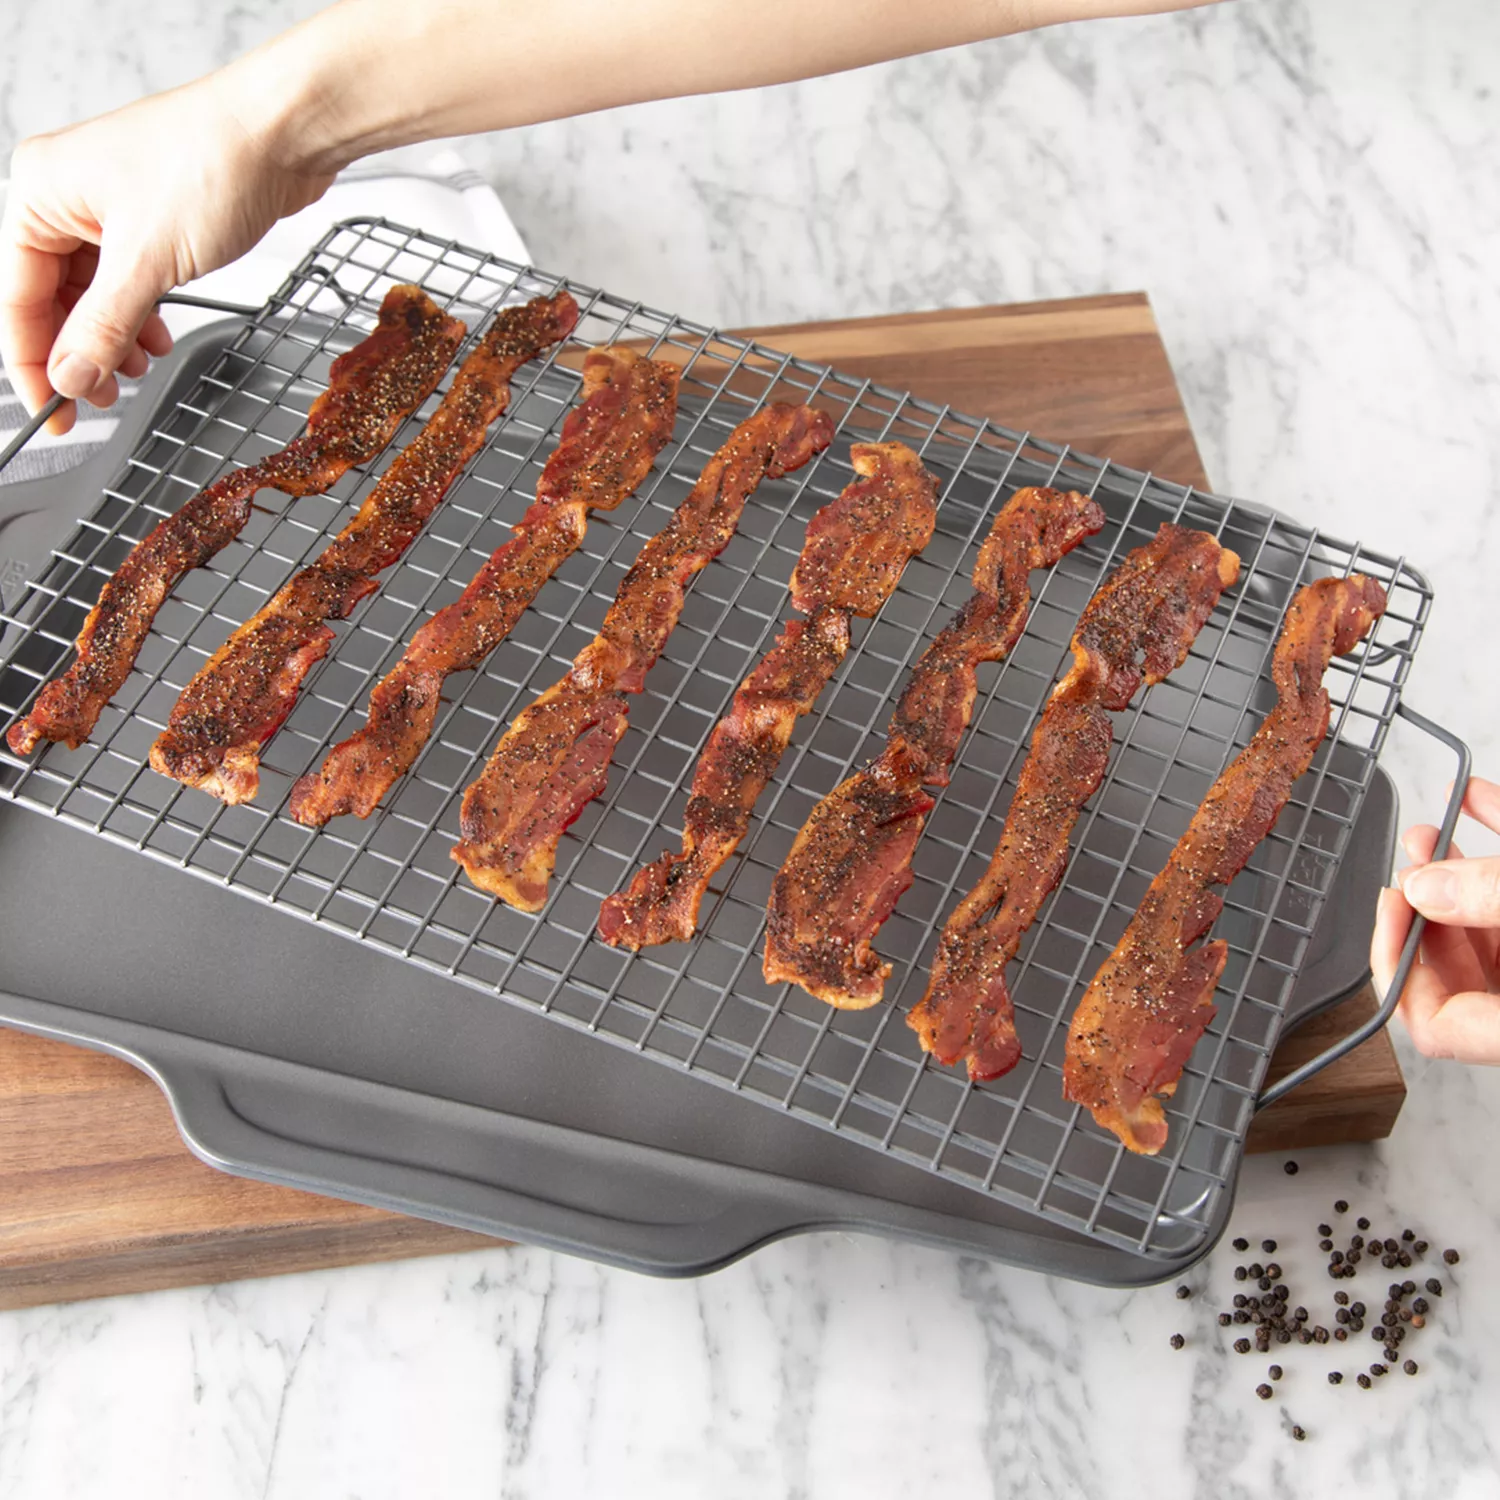 All-Clad Pro-Release Half Sheet With Cooling and Baking Rack + Reviews